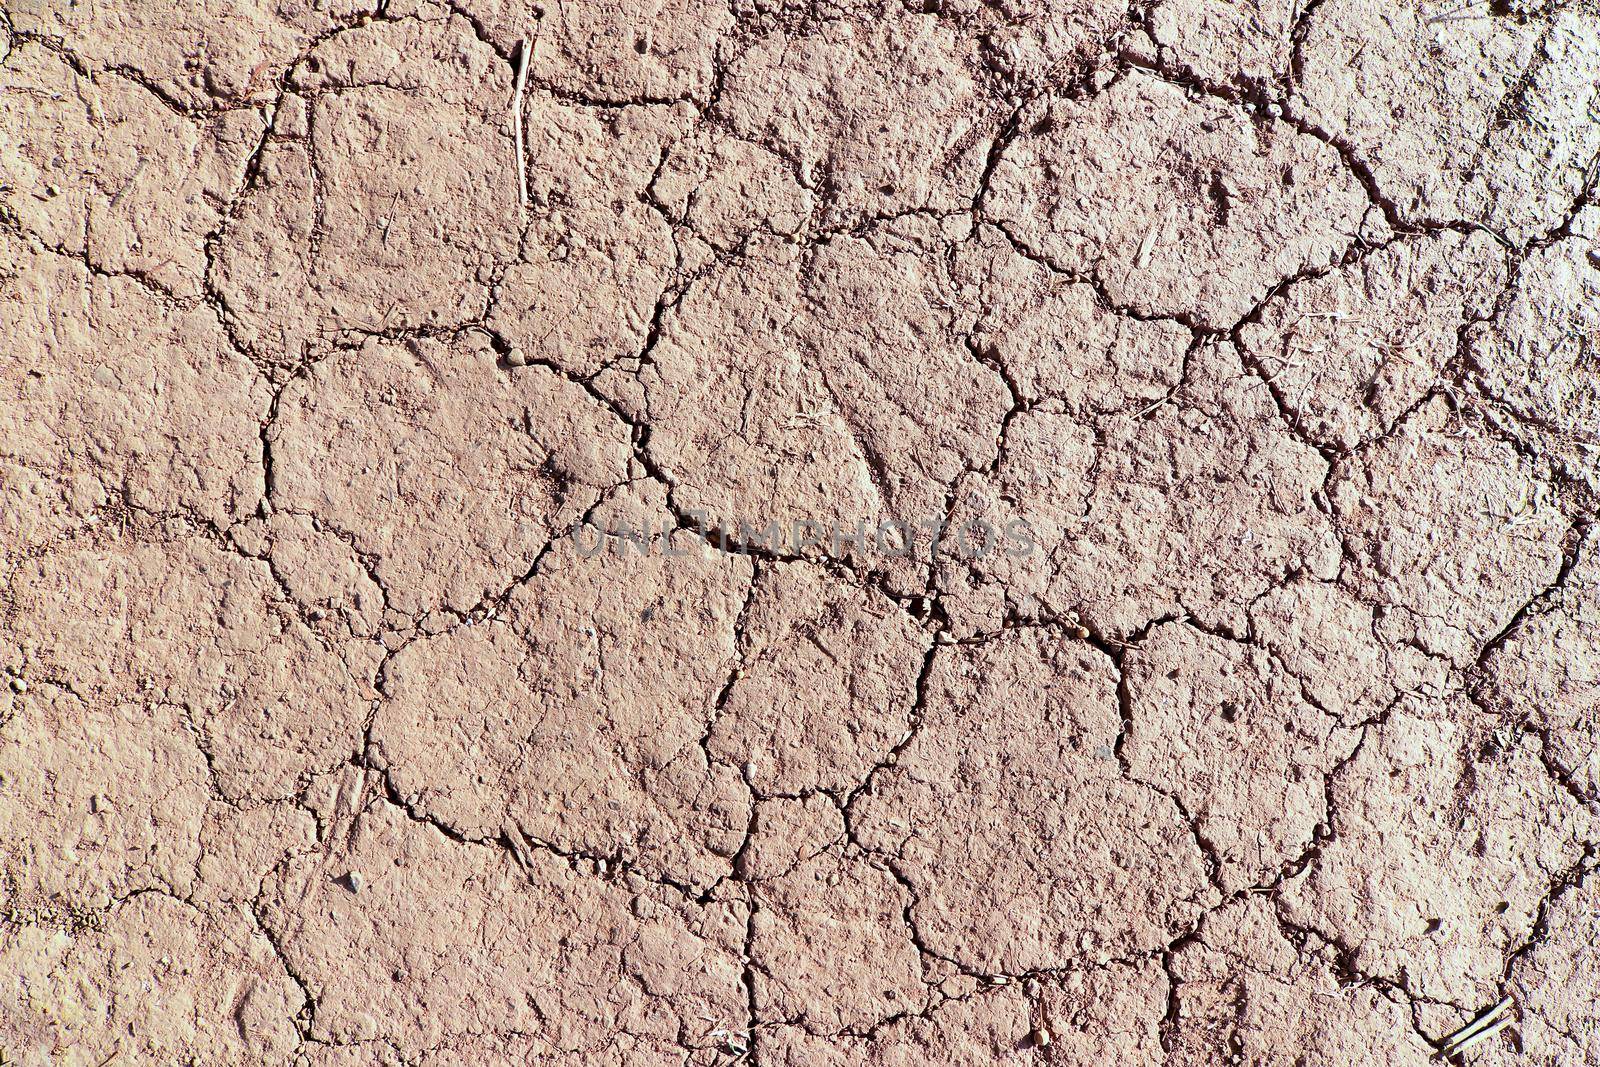 Detail of the cracked dried ground - dry season
